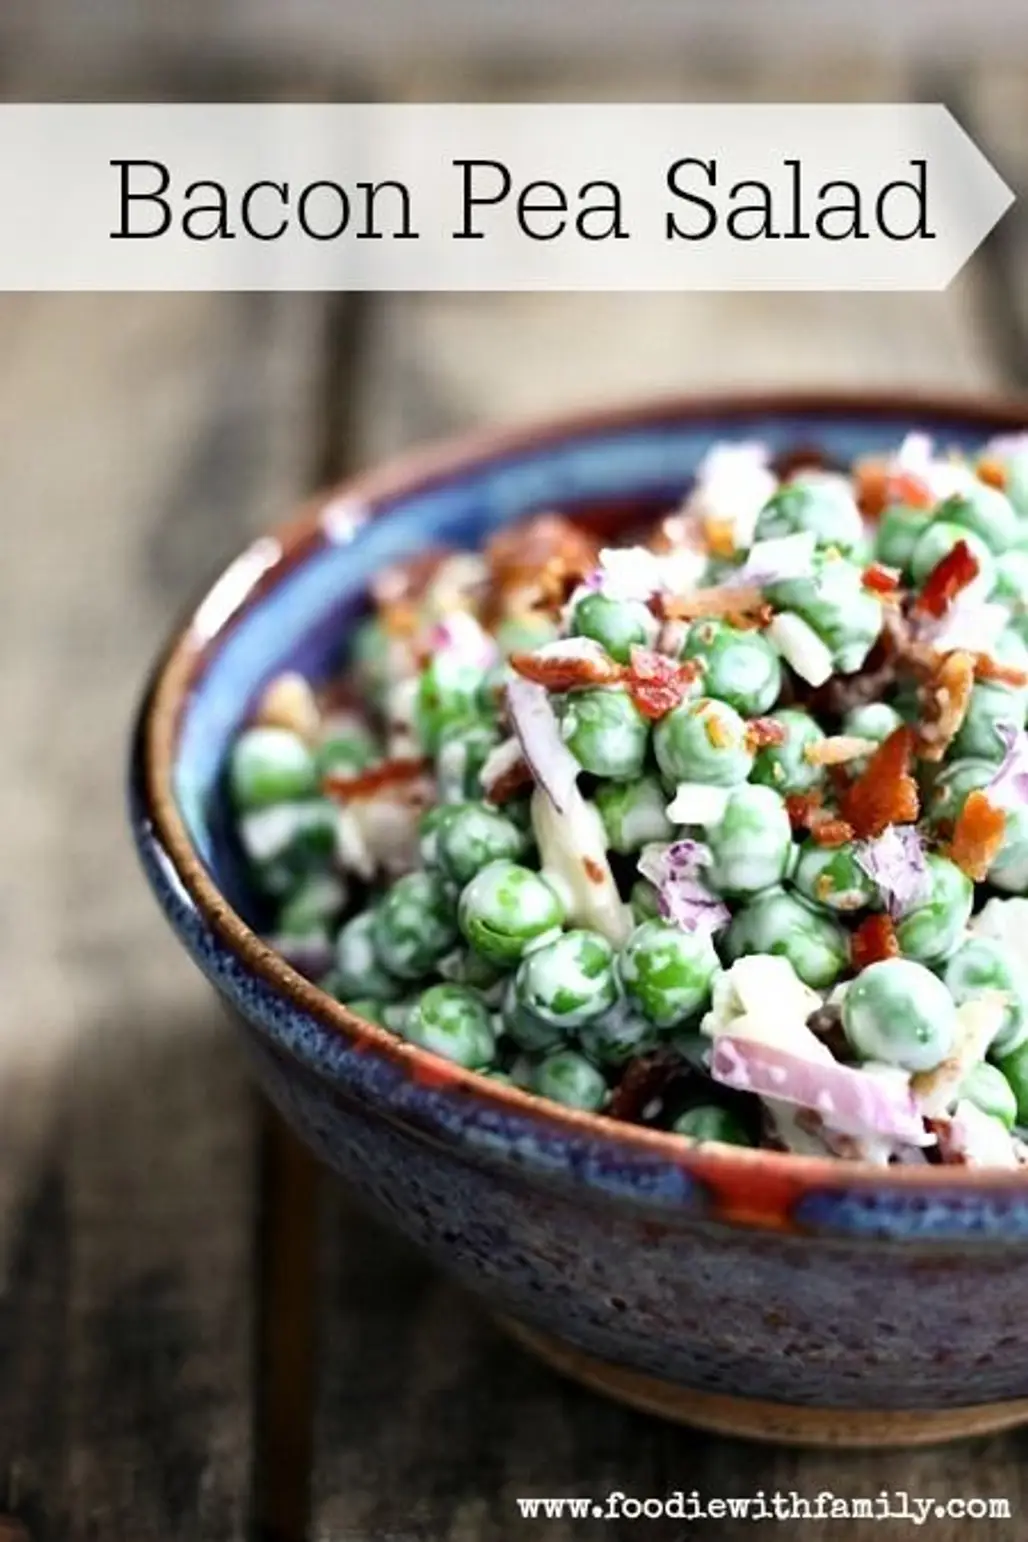 Bacon Pea Salad with Cheddar Cheese